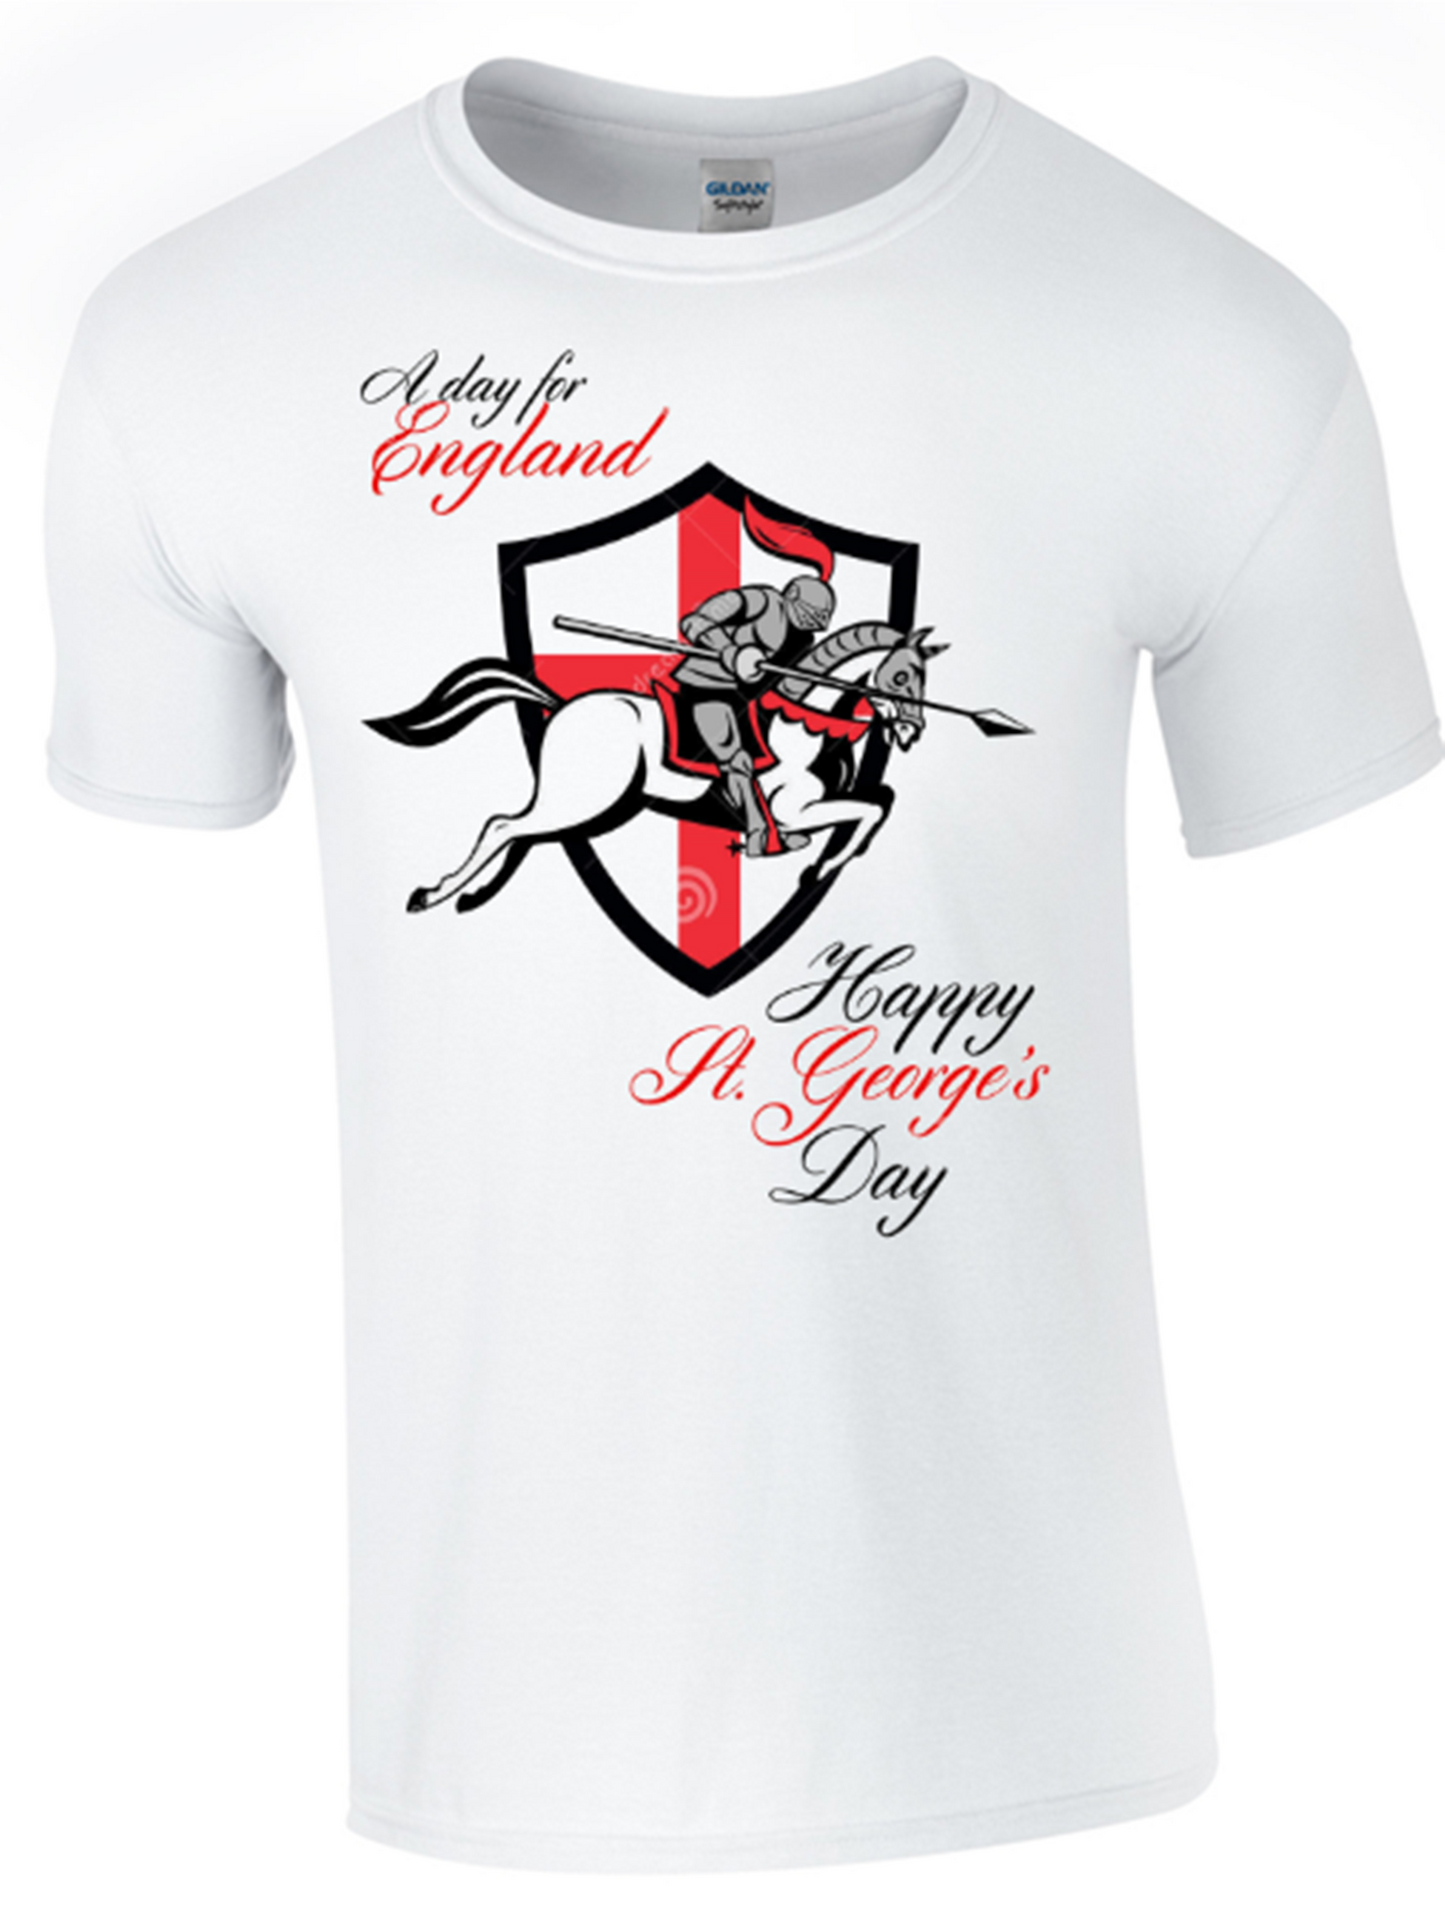 St George's Day A Day for England T-Shirt Printed DTG (Direct to Garment) for a Permanent Finish. - Army 1157 kit S Army 1157 Kit Veterans Owned Business